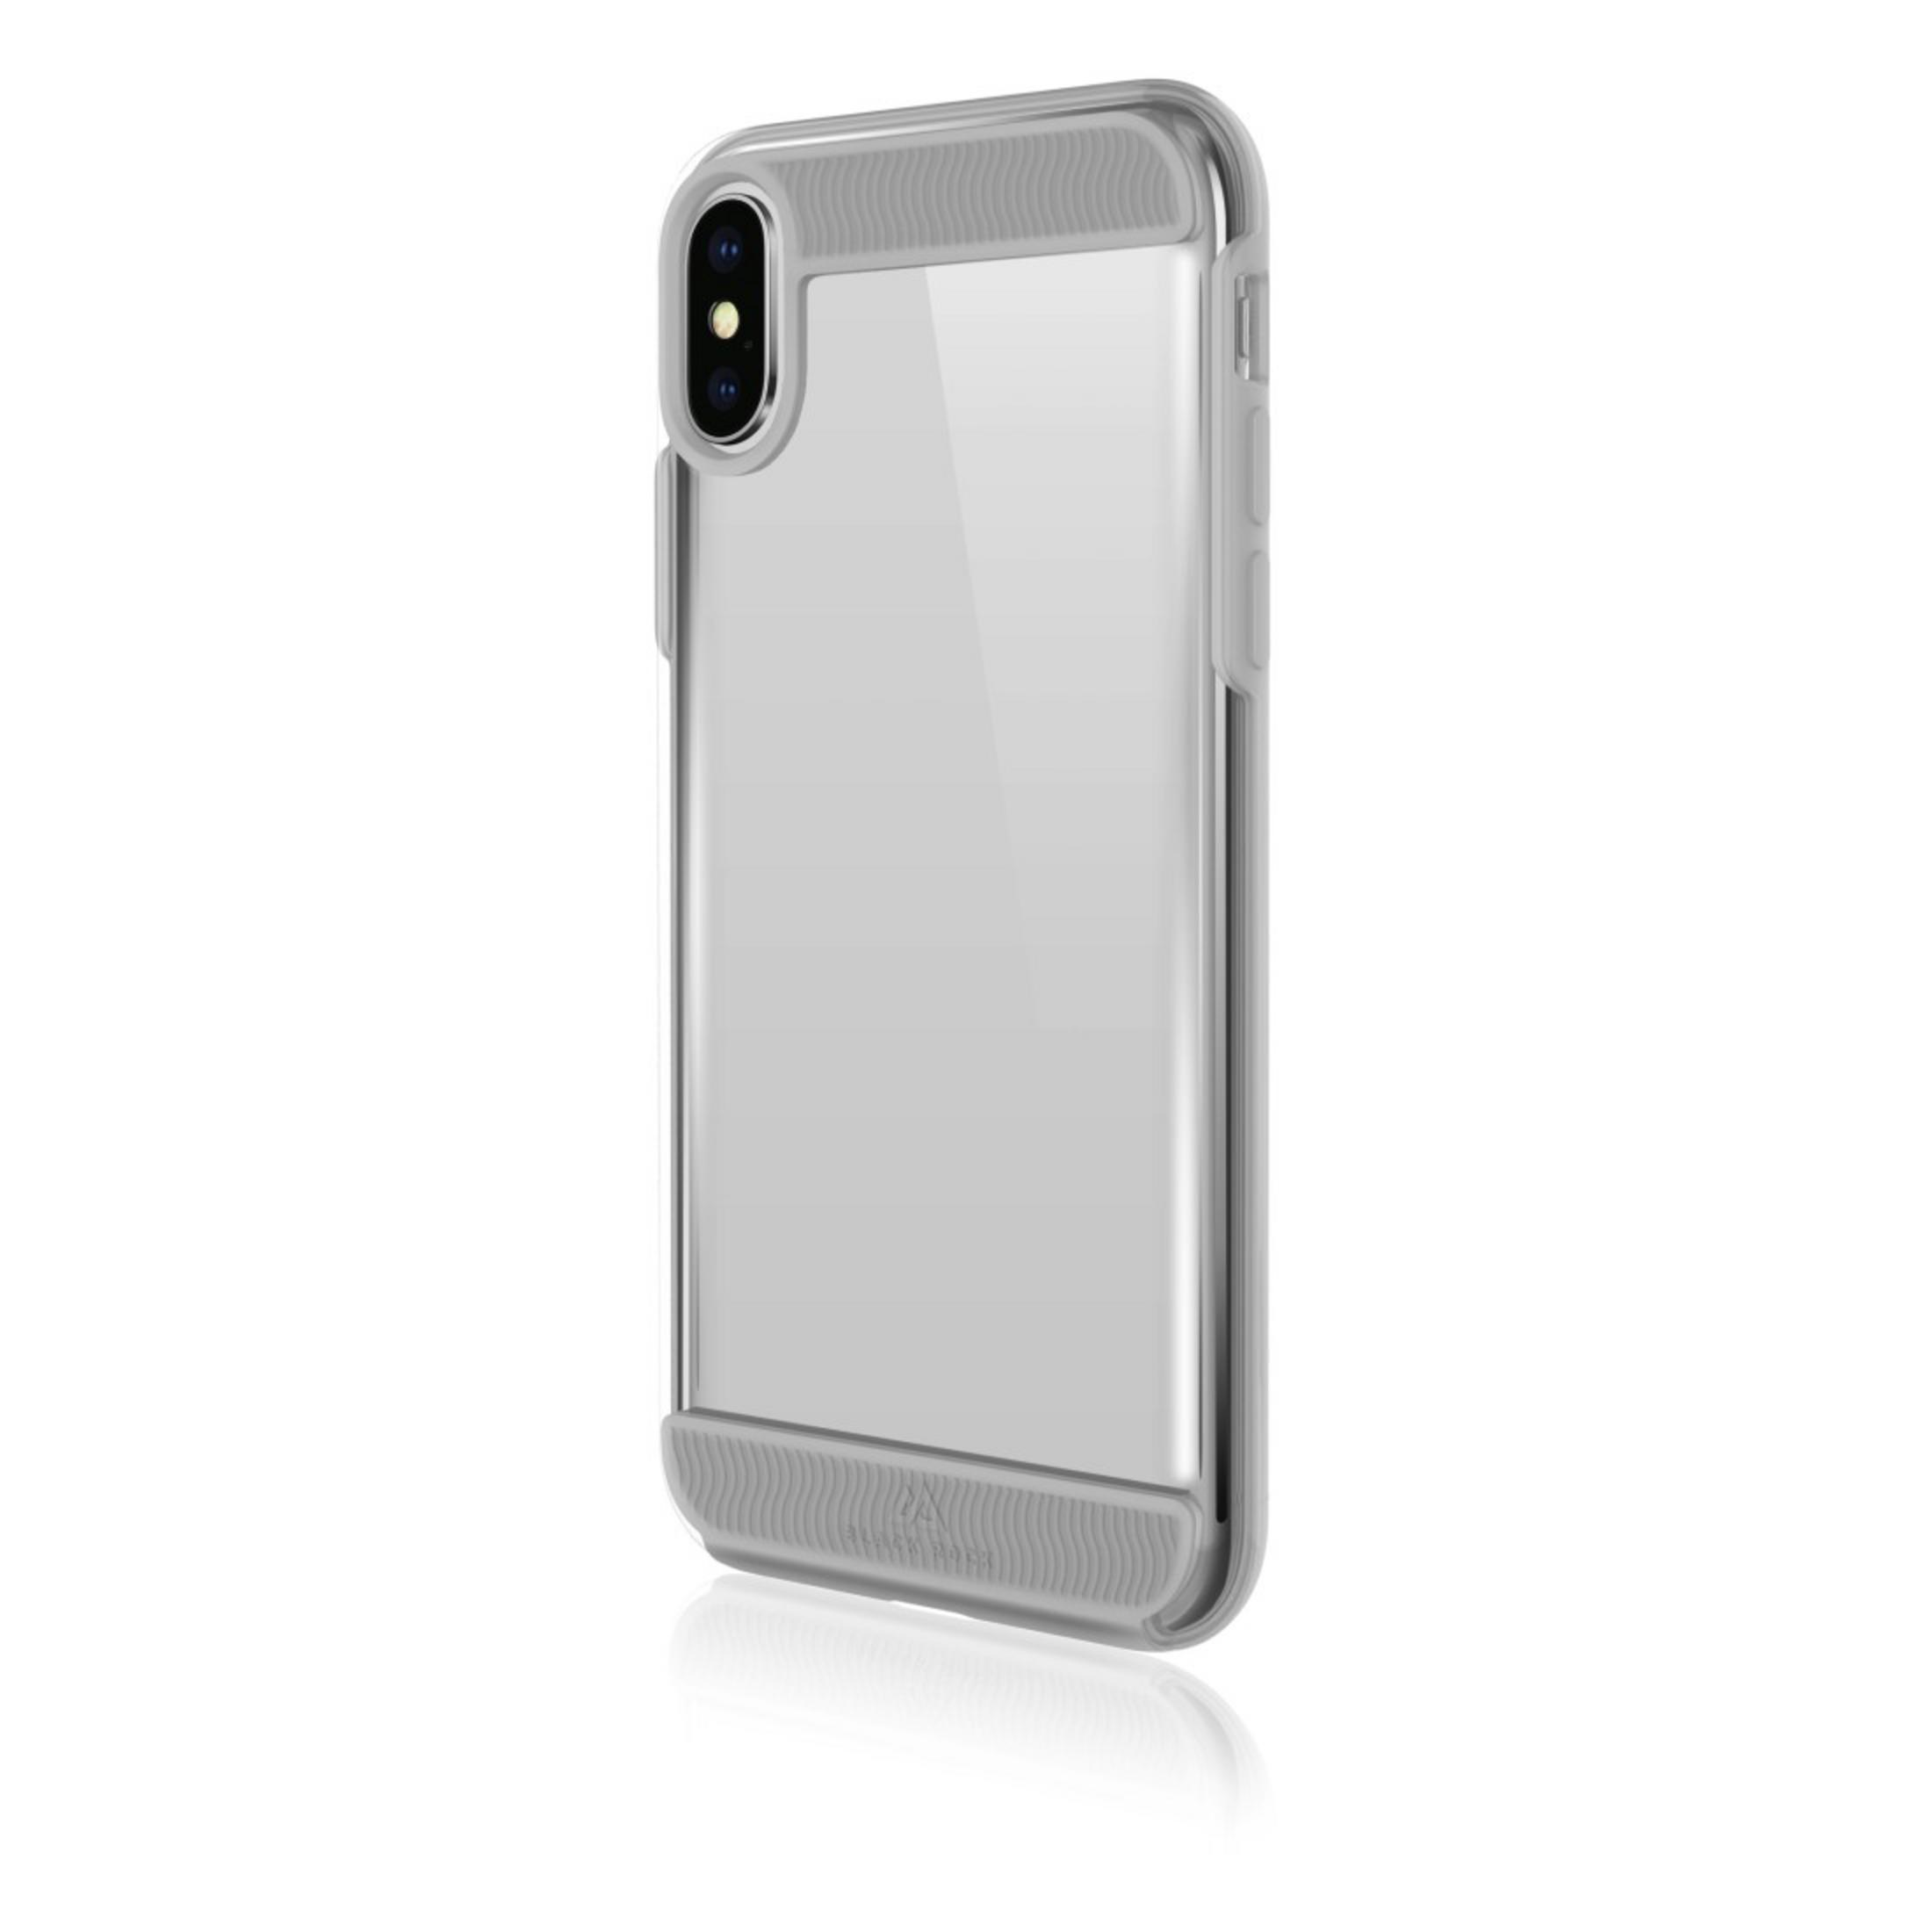 TR, XS XS Backcover, iPhone IPH ROCK CO ROBUST Max, 184447 Transparent Apple, MAX AIR BLACK